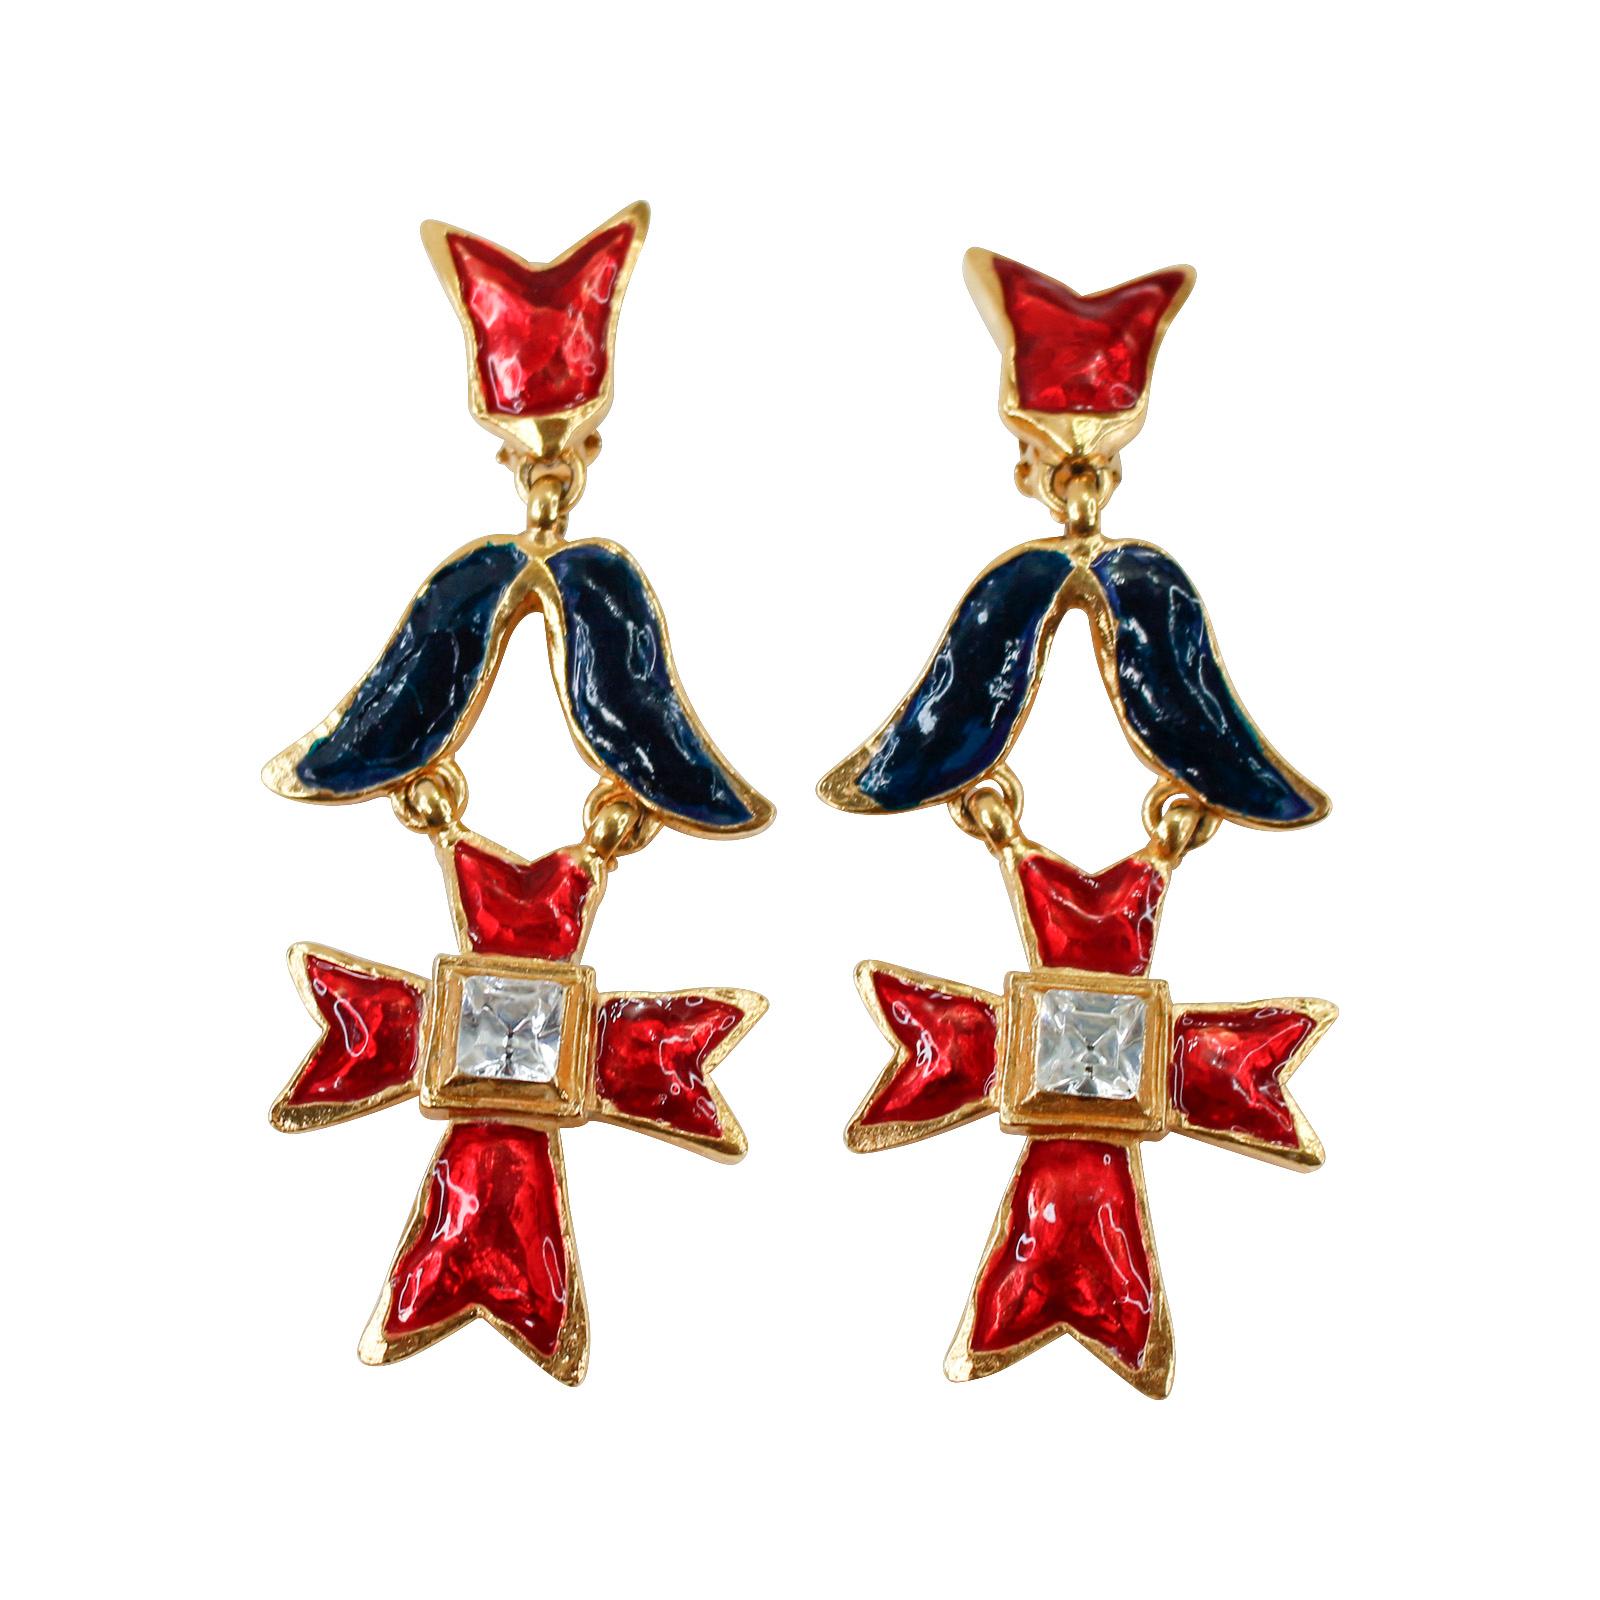 Vintage Christian Lacroix Gold Red, Blue Crystal Earrings Circa 1990s For Sale 2